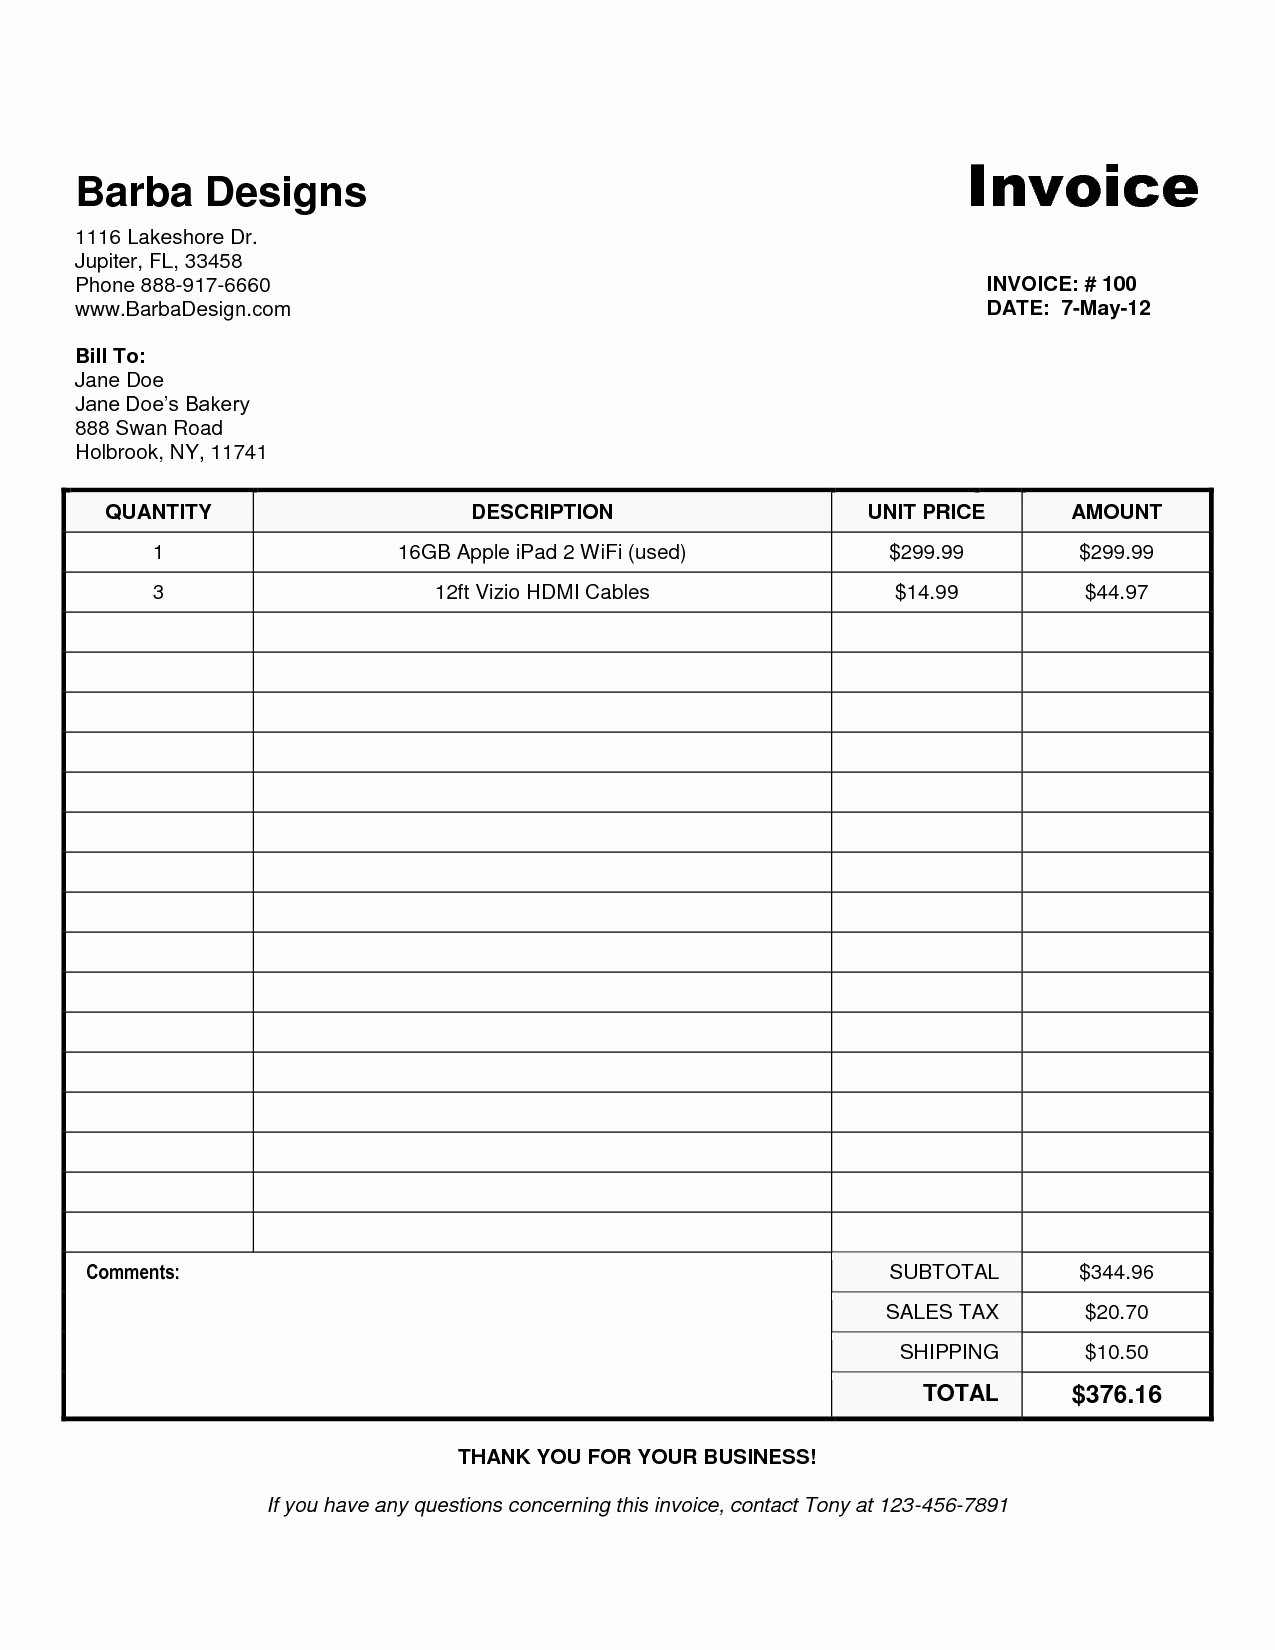 Free Billing Invoice Template Awesome Invoice Free Template Invoice Template Ideas